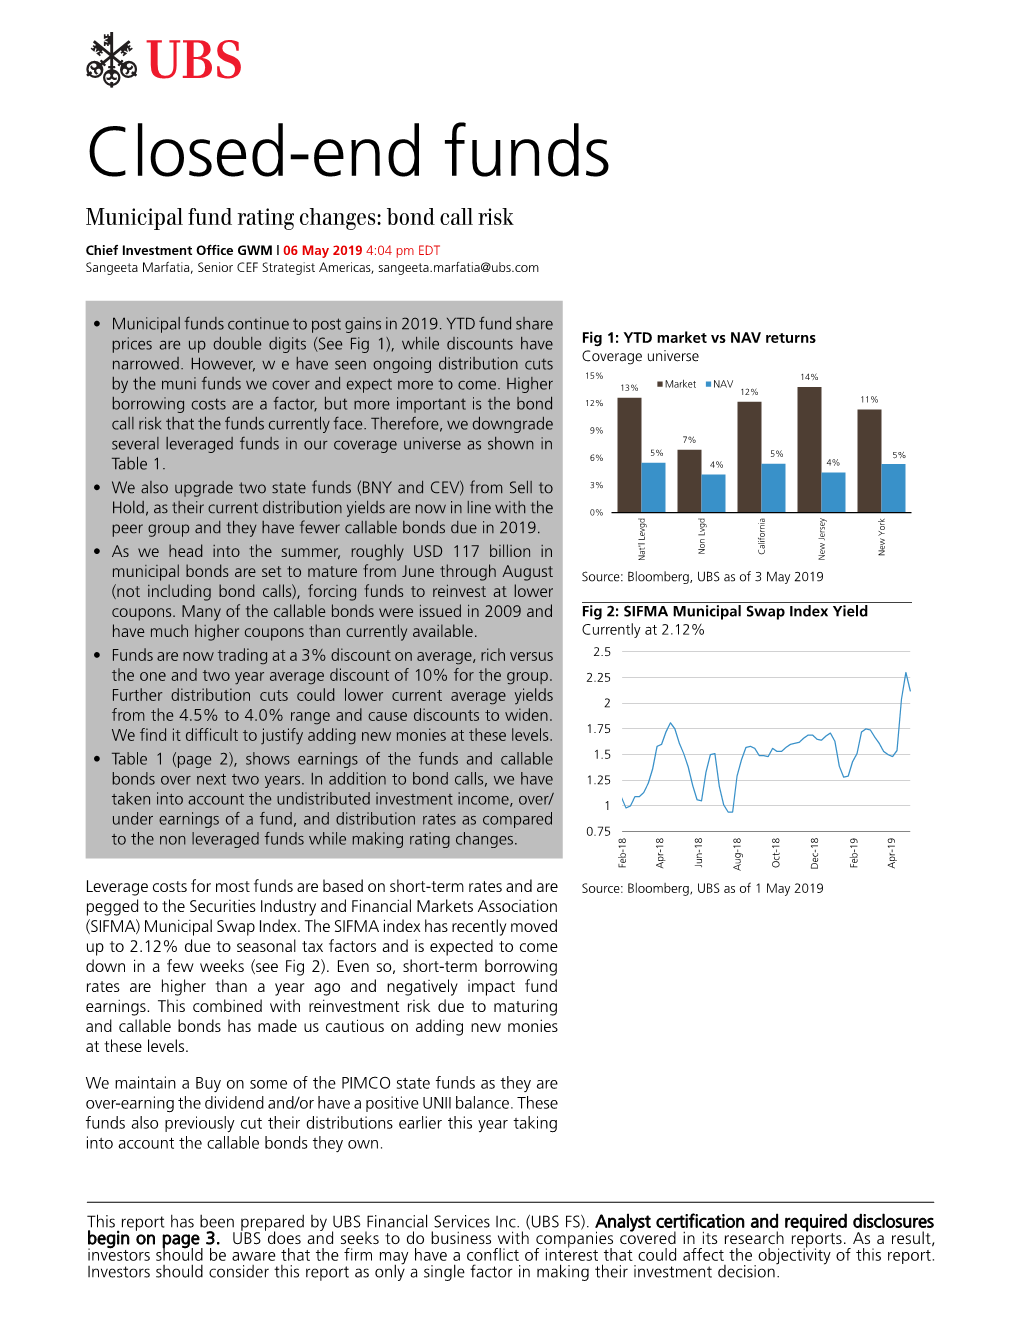 Closed-End Funds Municipal Fund Rating Changes: Bond Call Risk